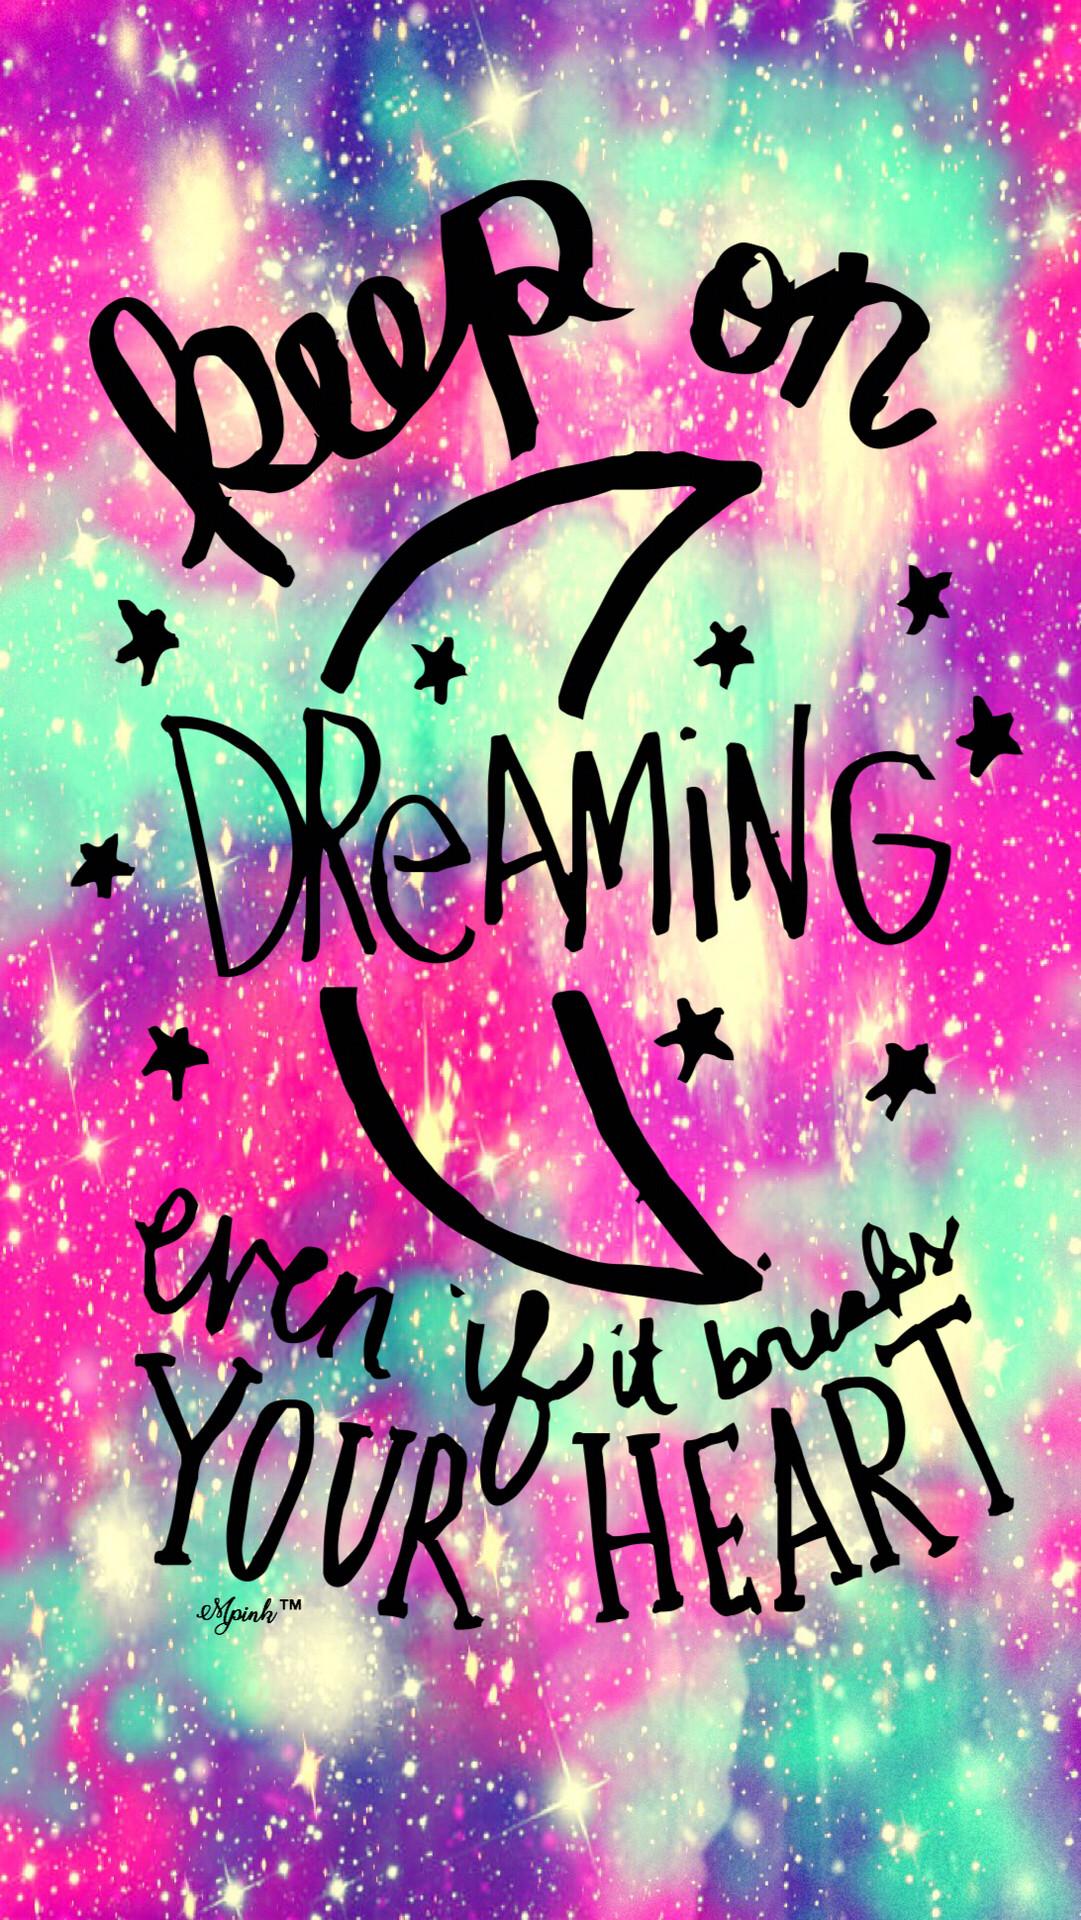 Keep On Dreaming Quote Galaxy IPhone Android Wallpaper